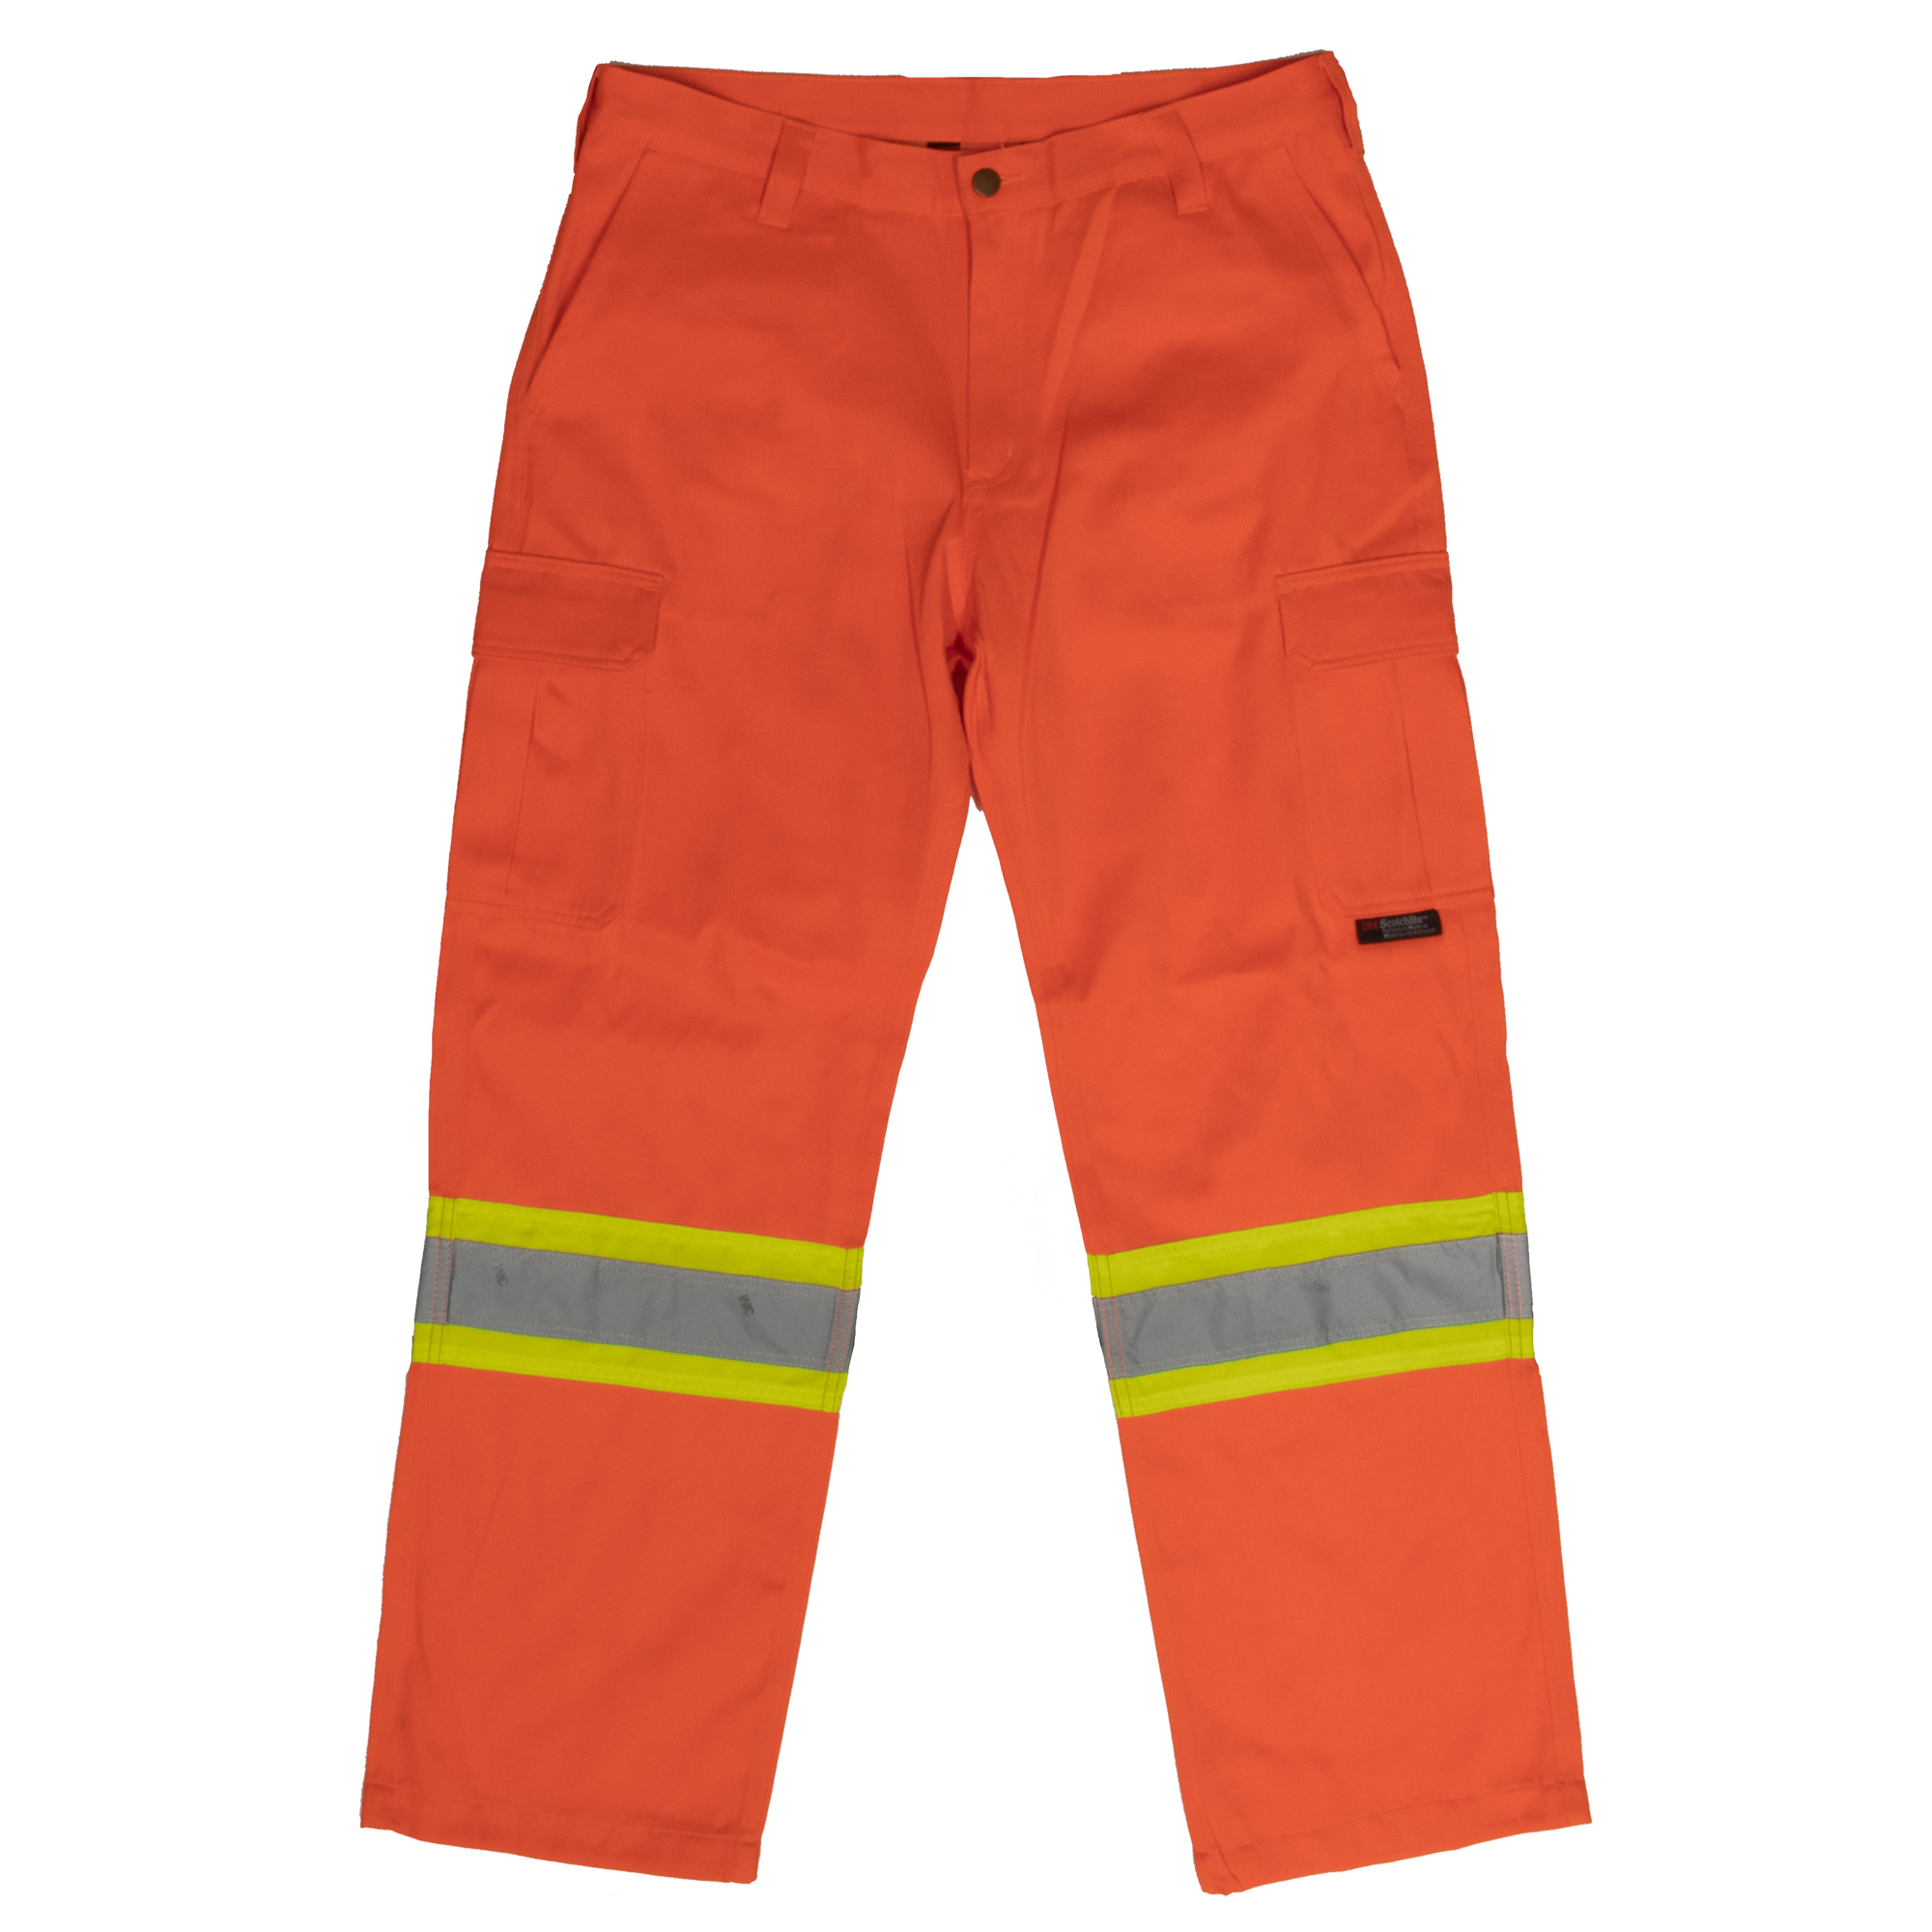 Tough Duck, Safety Cargo Work Pant, Waist 34 in, Inseam 30 in, Color Fluorescent Orange, Model SP010